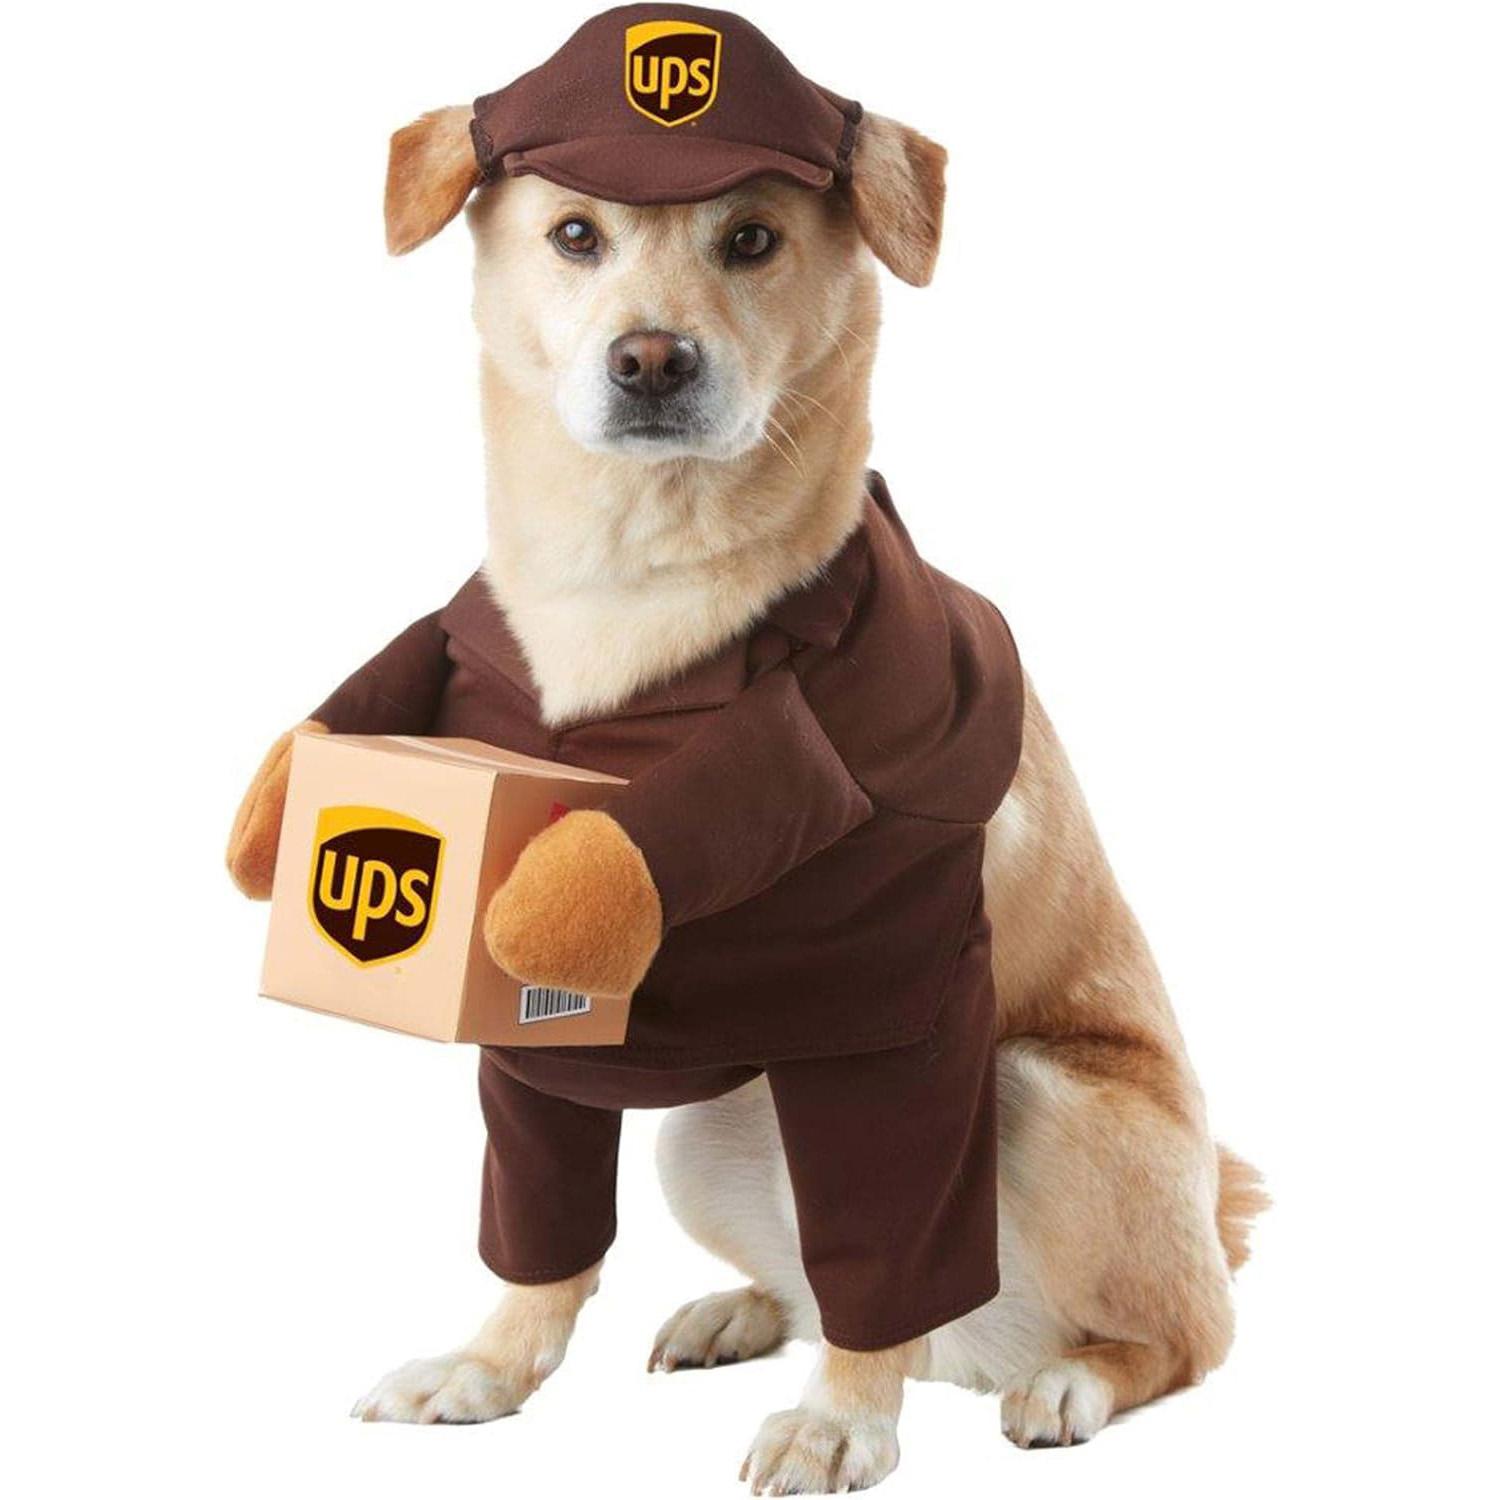 California Costumes UPS Delivery Driver Dog and Cat Costume for $12.47